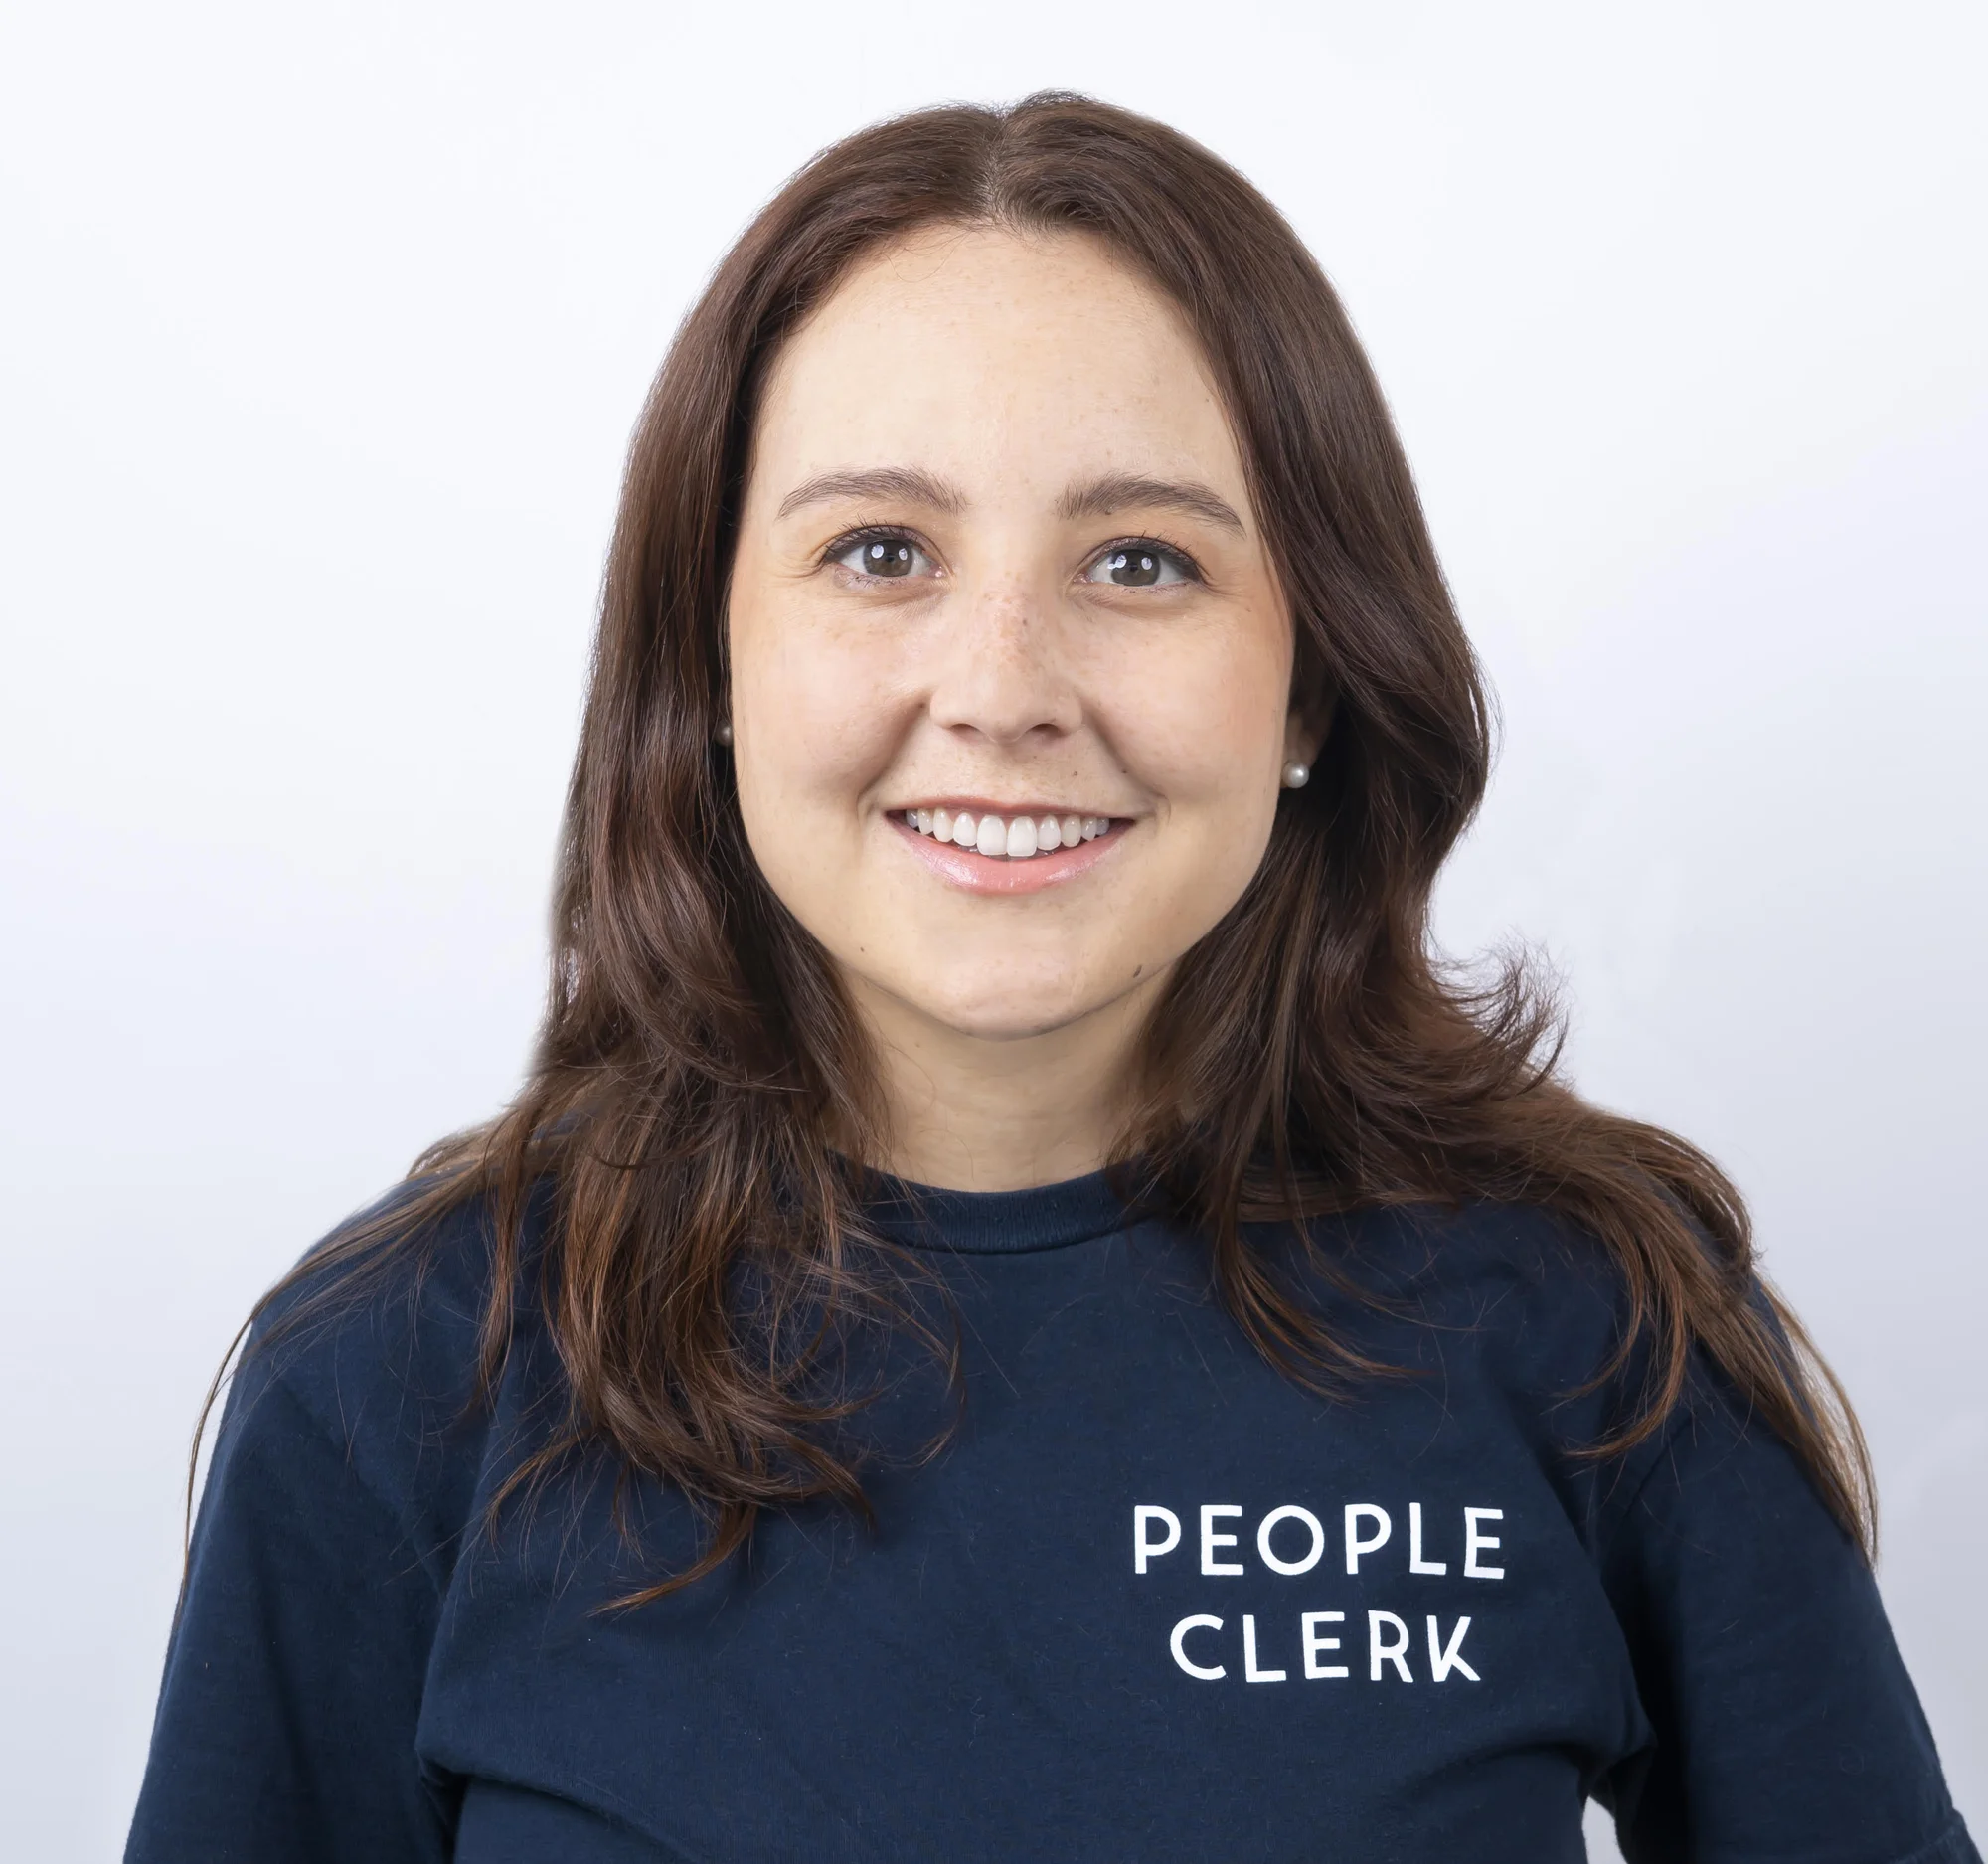 A woman with brown hair over her shoulders smiles at camera, wearing a black shirt that says "People Clerk" in white letters.